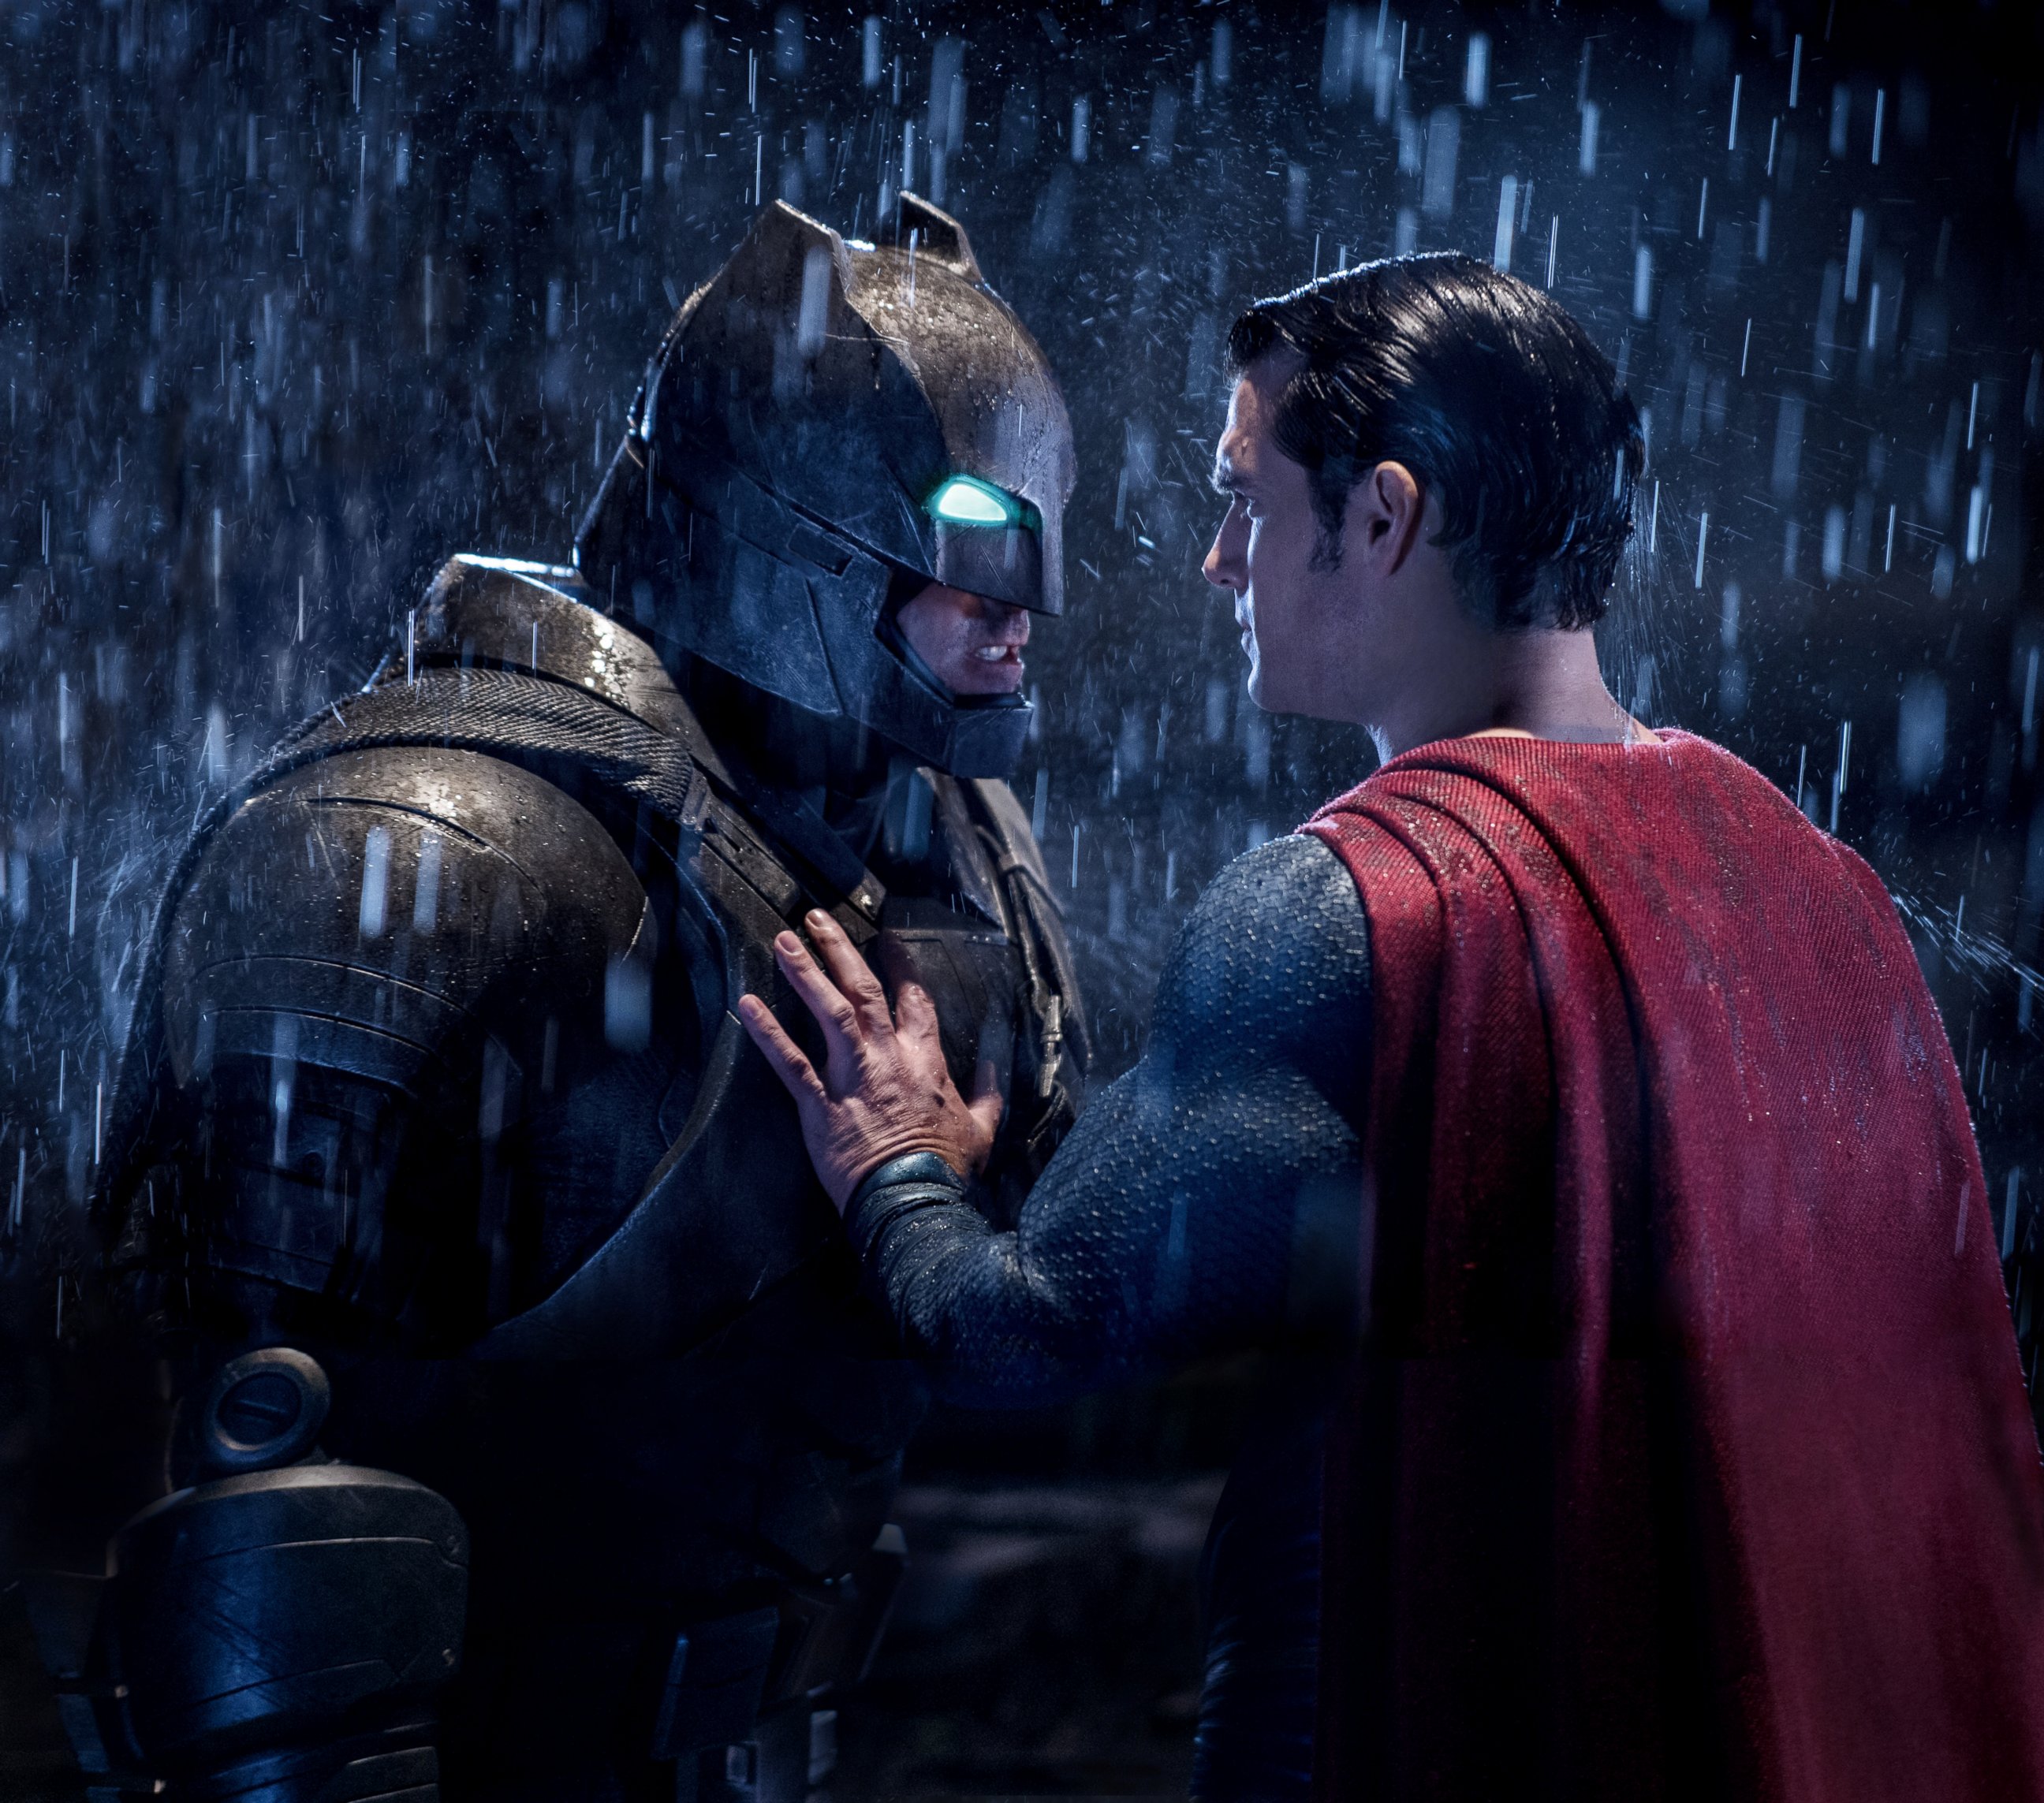 PHOTO: A production still of Batman v Superman: Dawn of Justice is seen here.